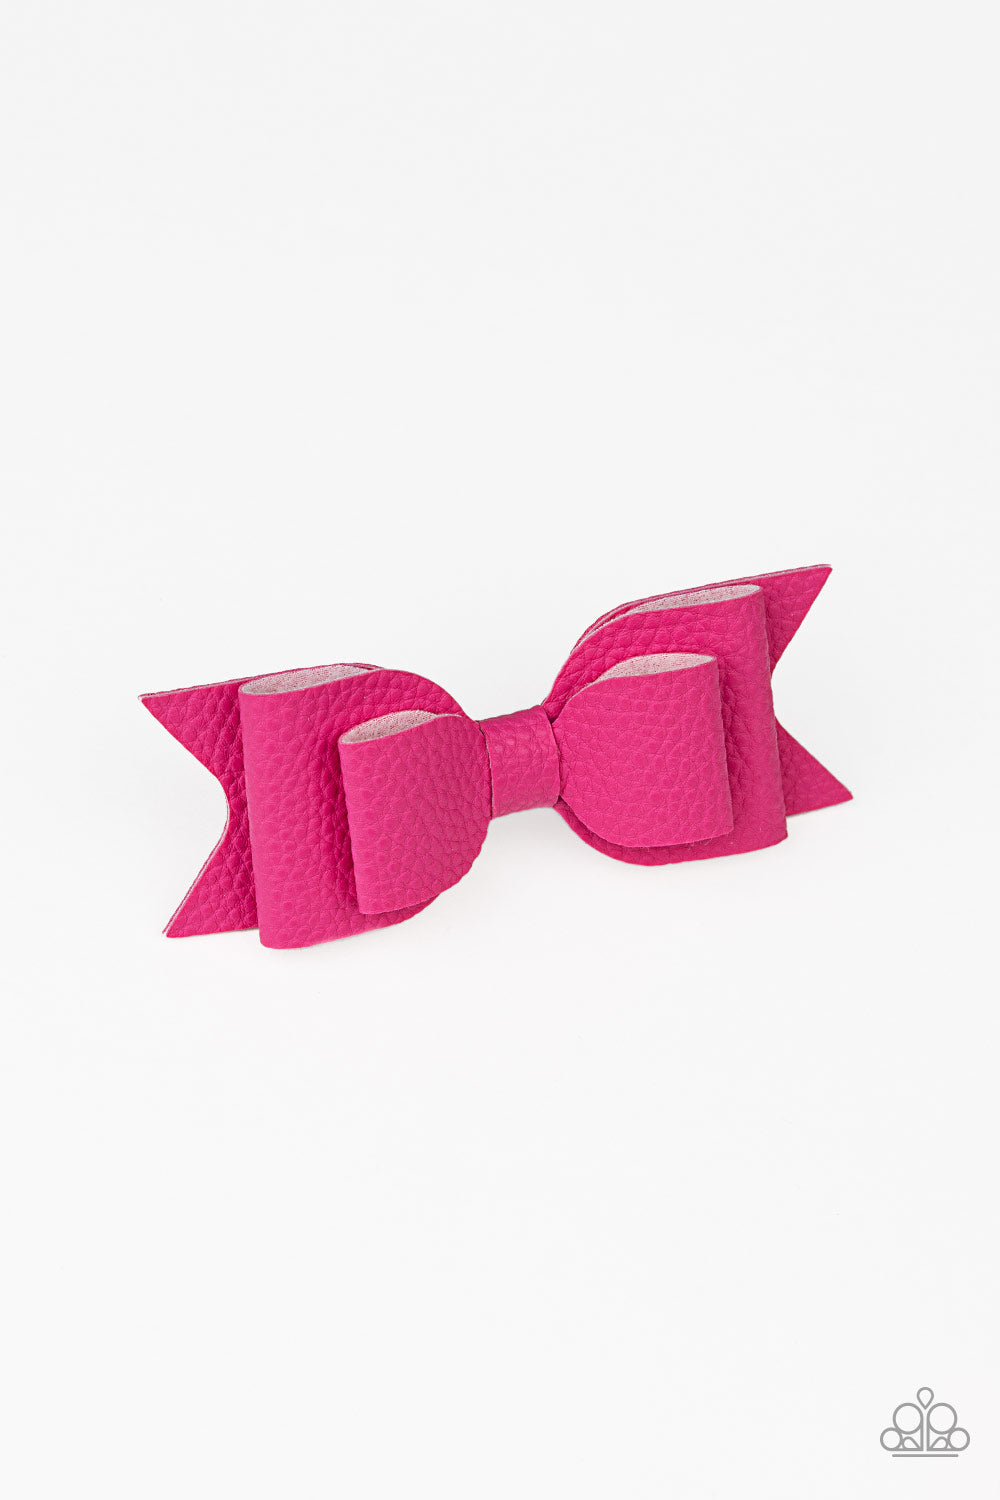 Paparazzi BOW Wow Wow - Pink - Leather - Hair Clip - $5 Jewelry with Ashley Swint